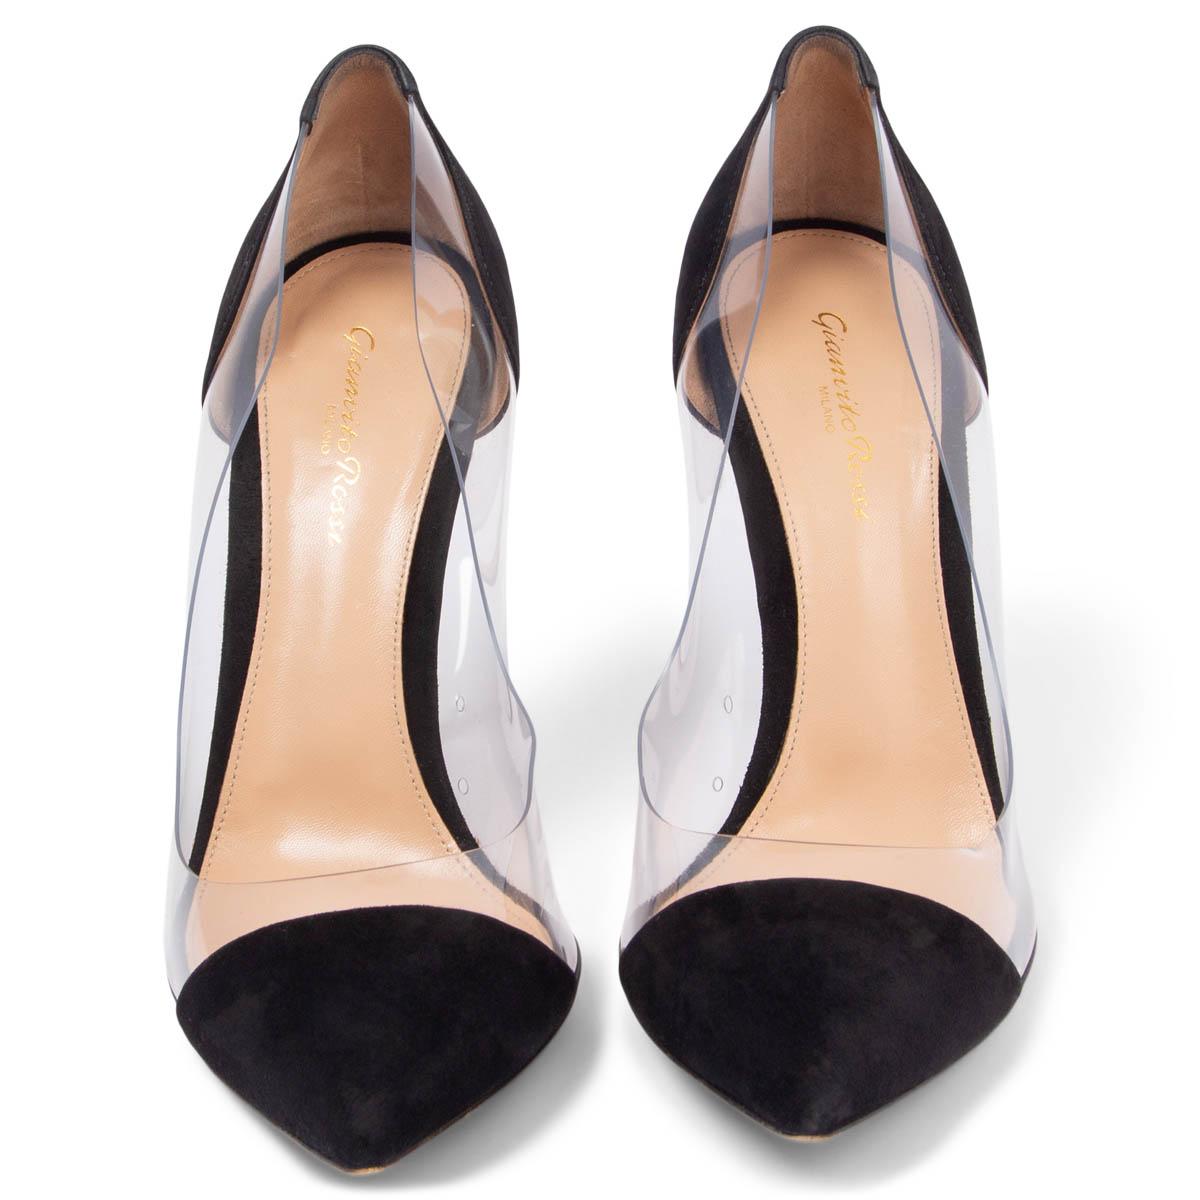 100% authentic Gianvito Rossi Plexi 100 pointed-toe pumps in black suede and clear PVC. Have been worn and are in excellent condition. 

Measurements
Imprinted Size	41
Shoe Size	41
Inside Sole	27.5cm (10.7in)
Width	7.5cm (2.9in)
Heel	10cm